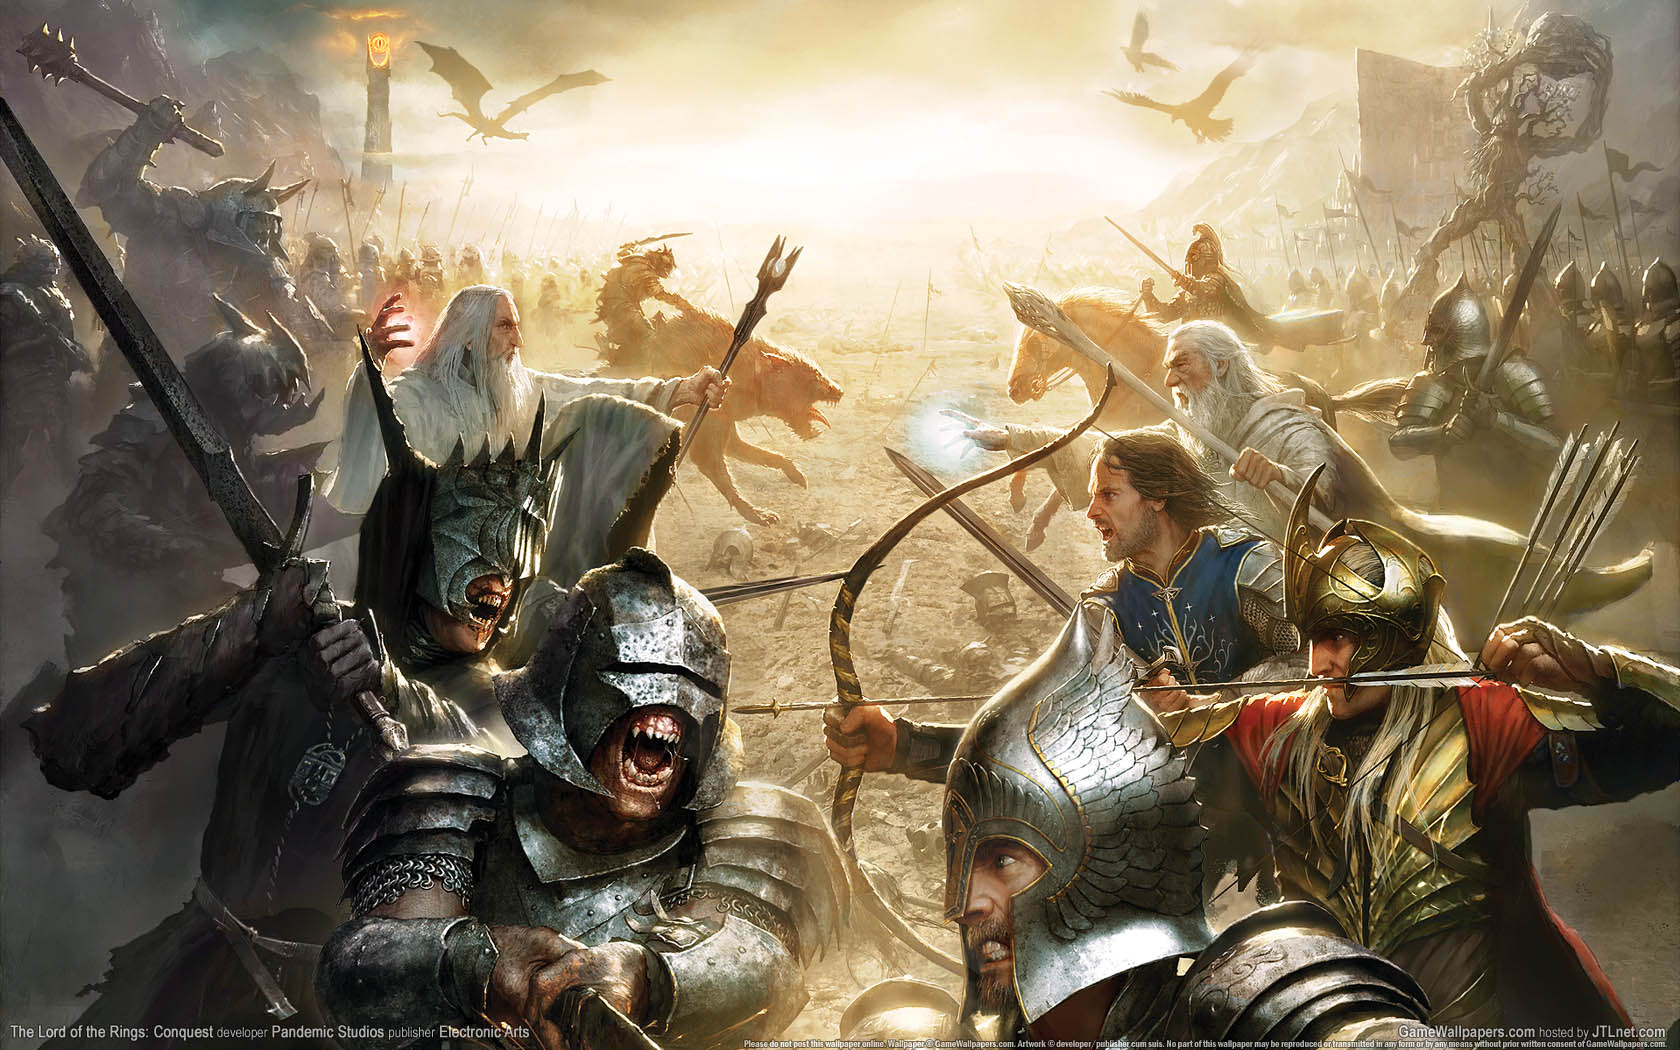 The Lord of the Rings: Conquest fond d'cran 01 1680x1050